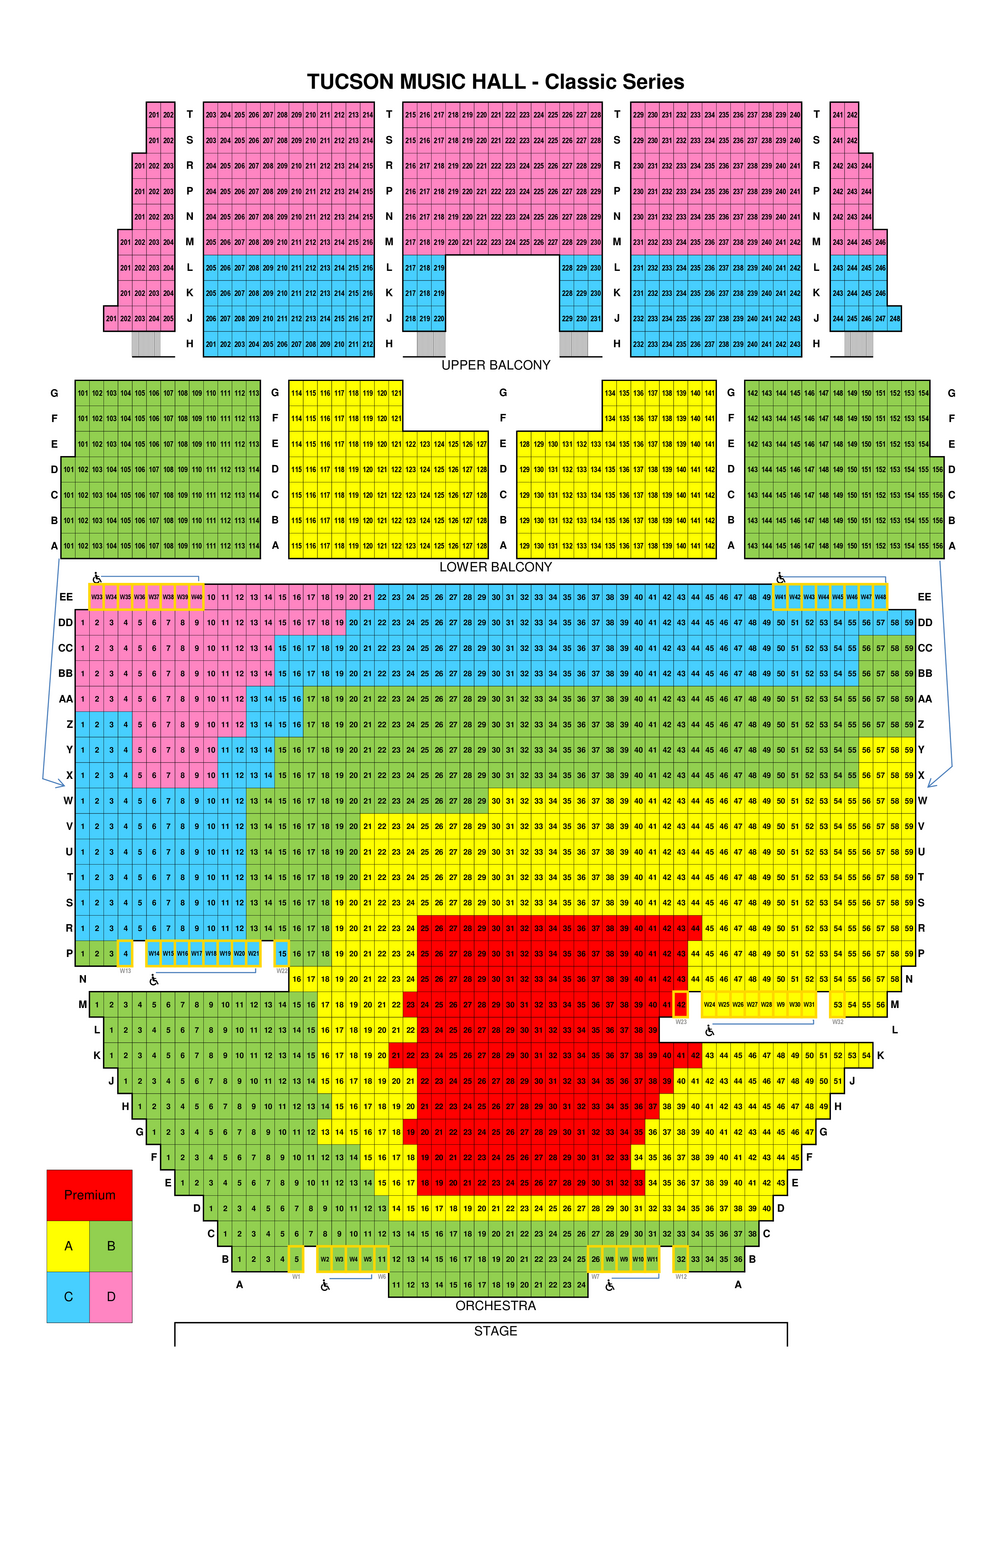 Seating Maps - Tucson Symphony Orchestra